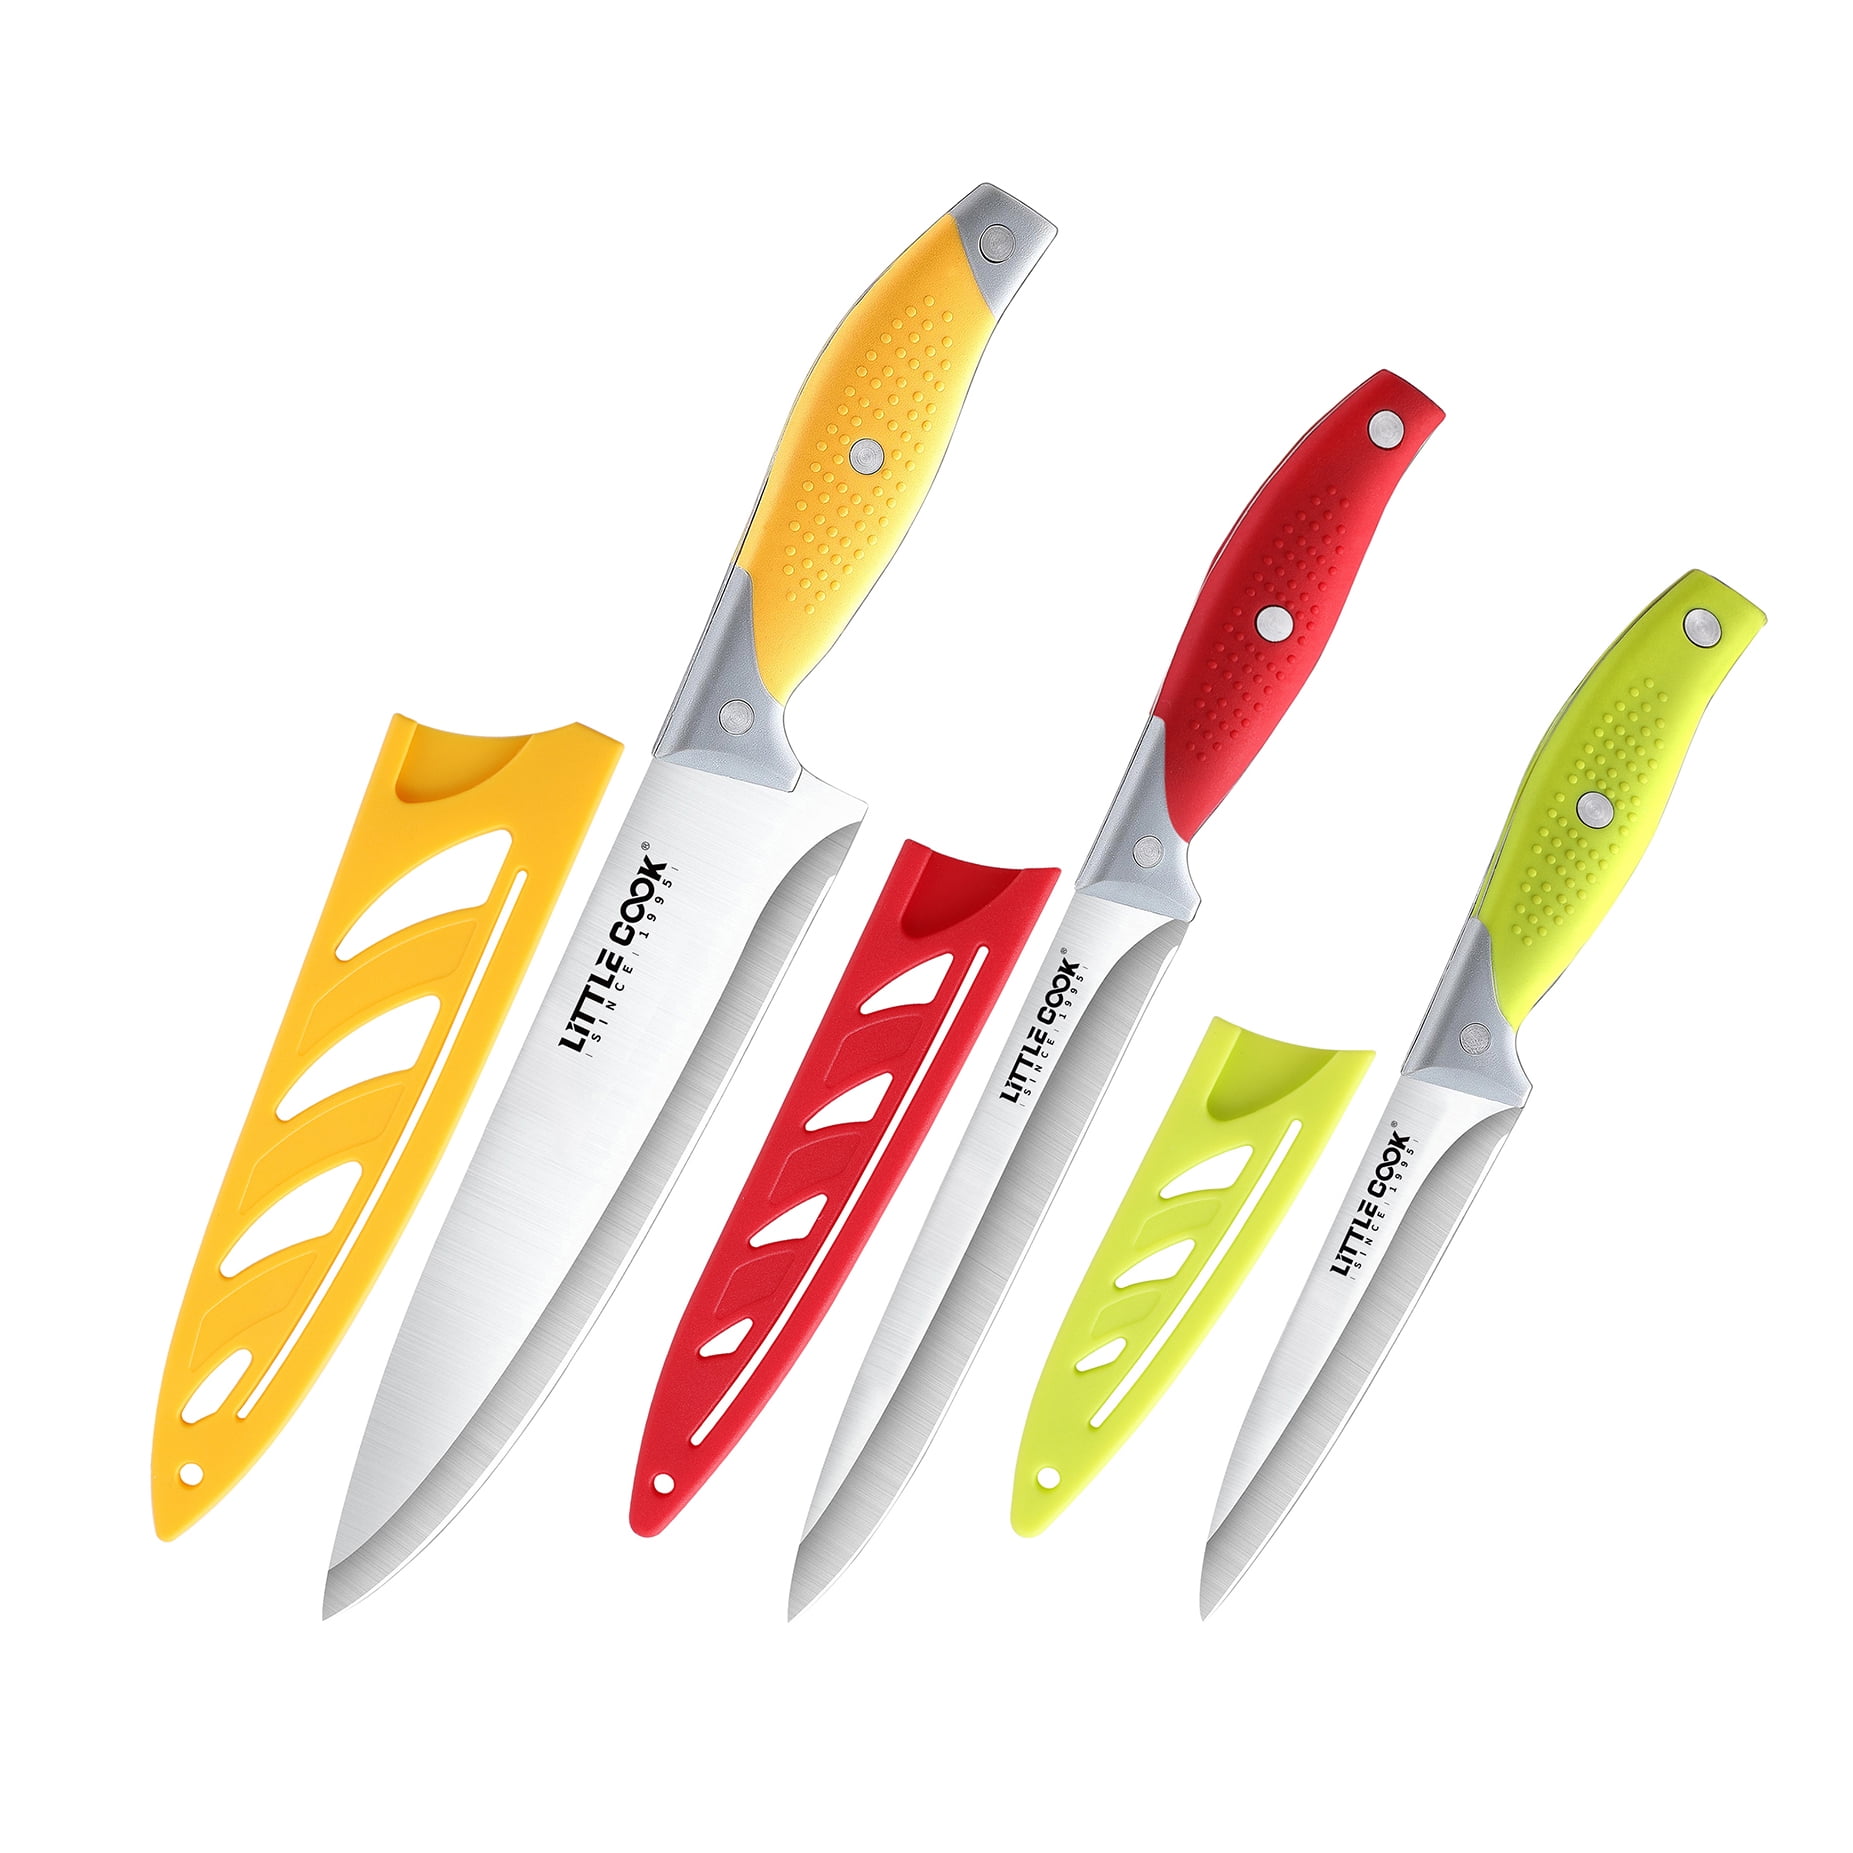 Magiware Paring Knife, 8PCS Paring Knife Set with Cover, Small Kitchen  Vegetable Fruit Knives, 3.5 Inch Ultra Sharp PP Handle